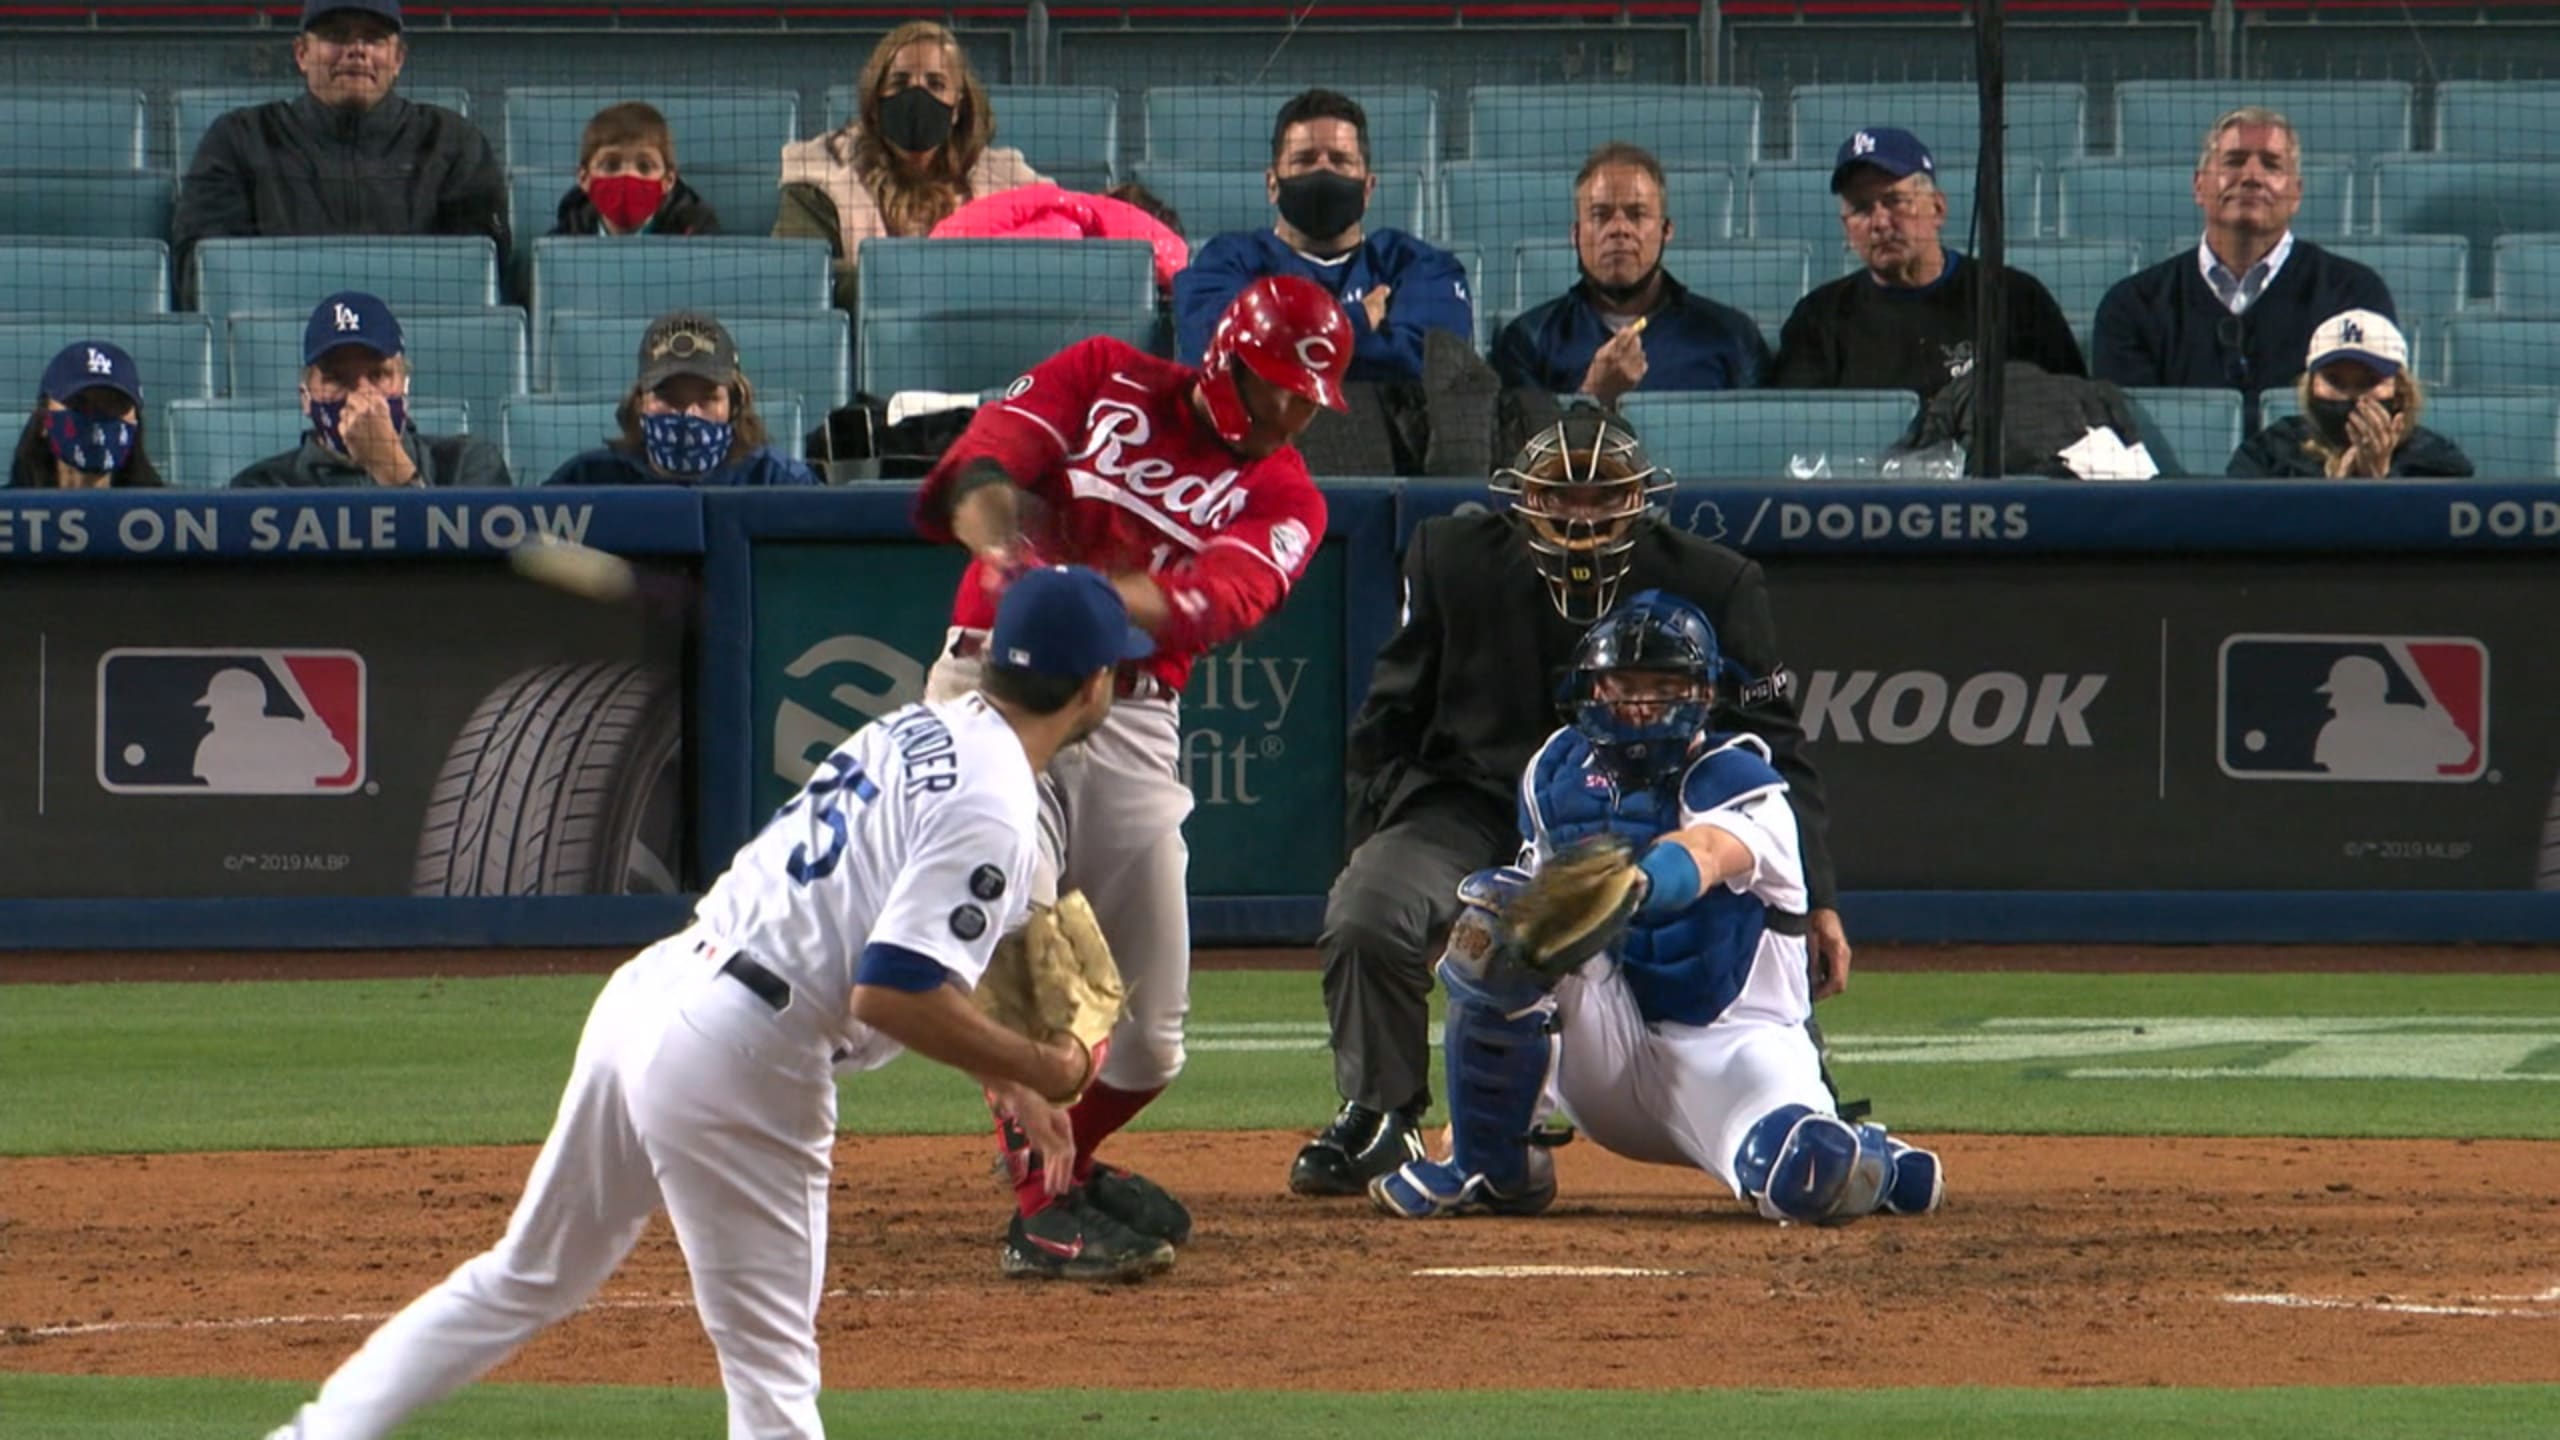 Jesse Winker homer leads Reds over Dodgers in extra innings 